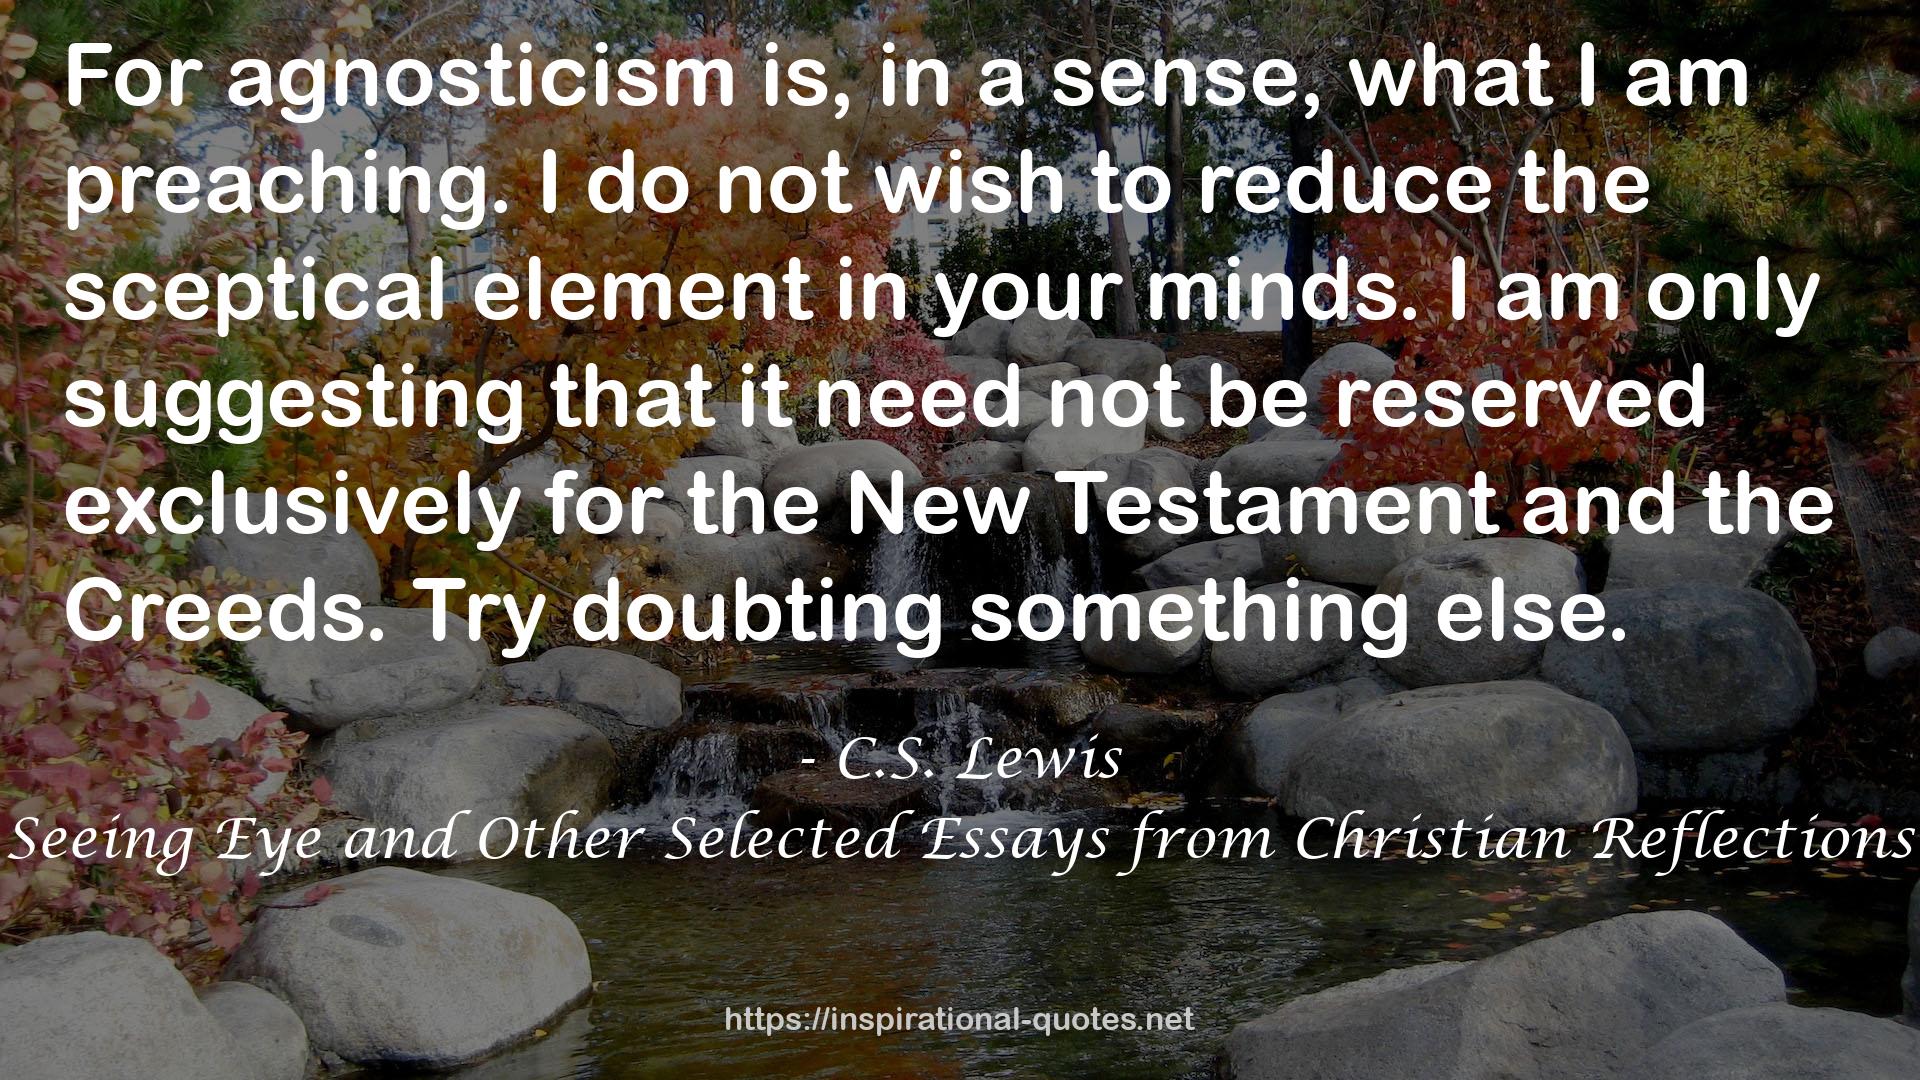 Seeing Eye and Other Selected Essays from Christian Reflections QUOTES